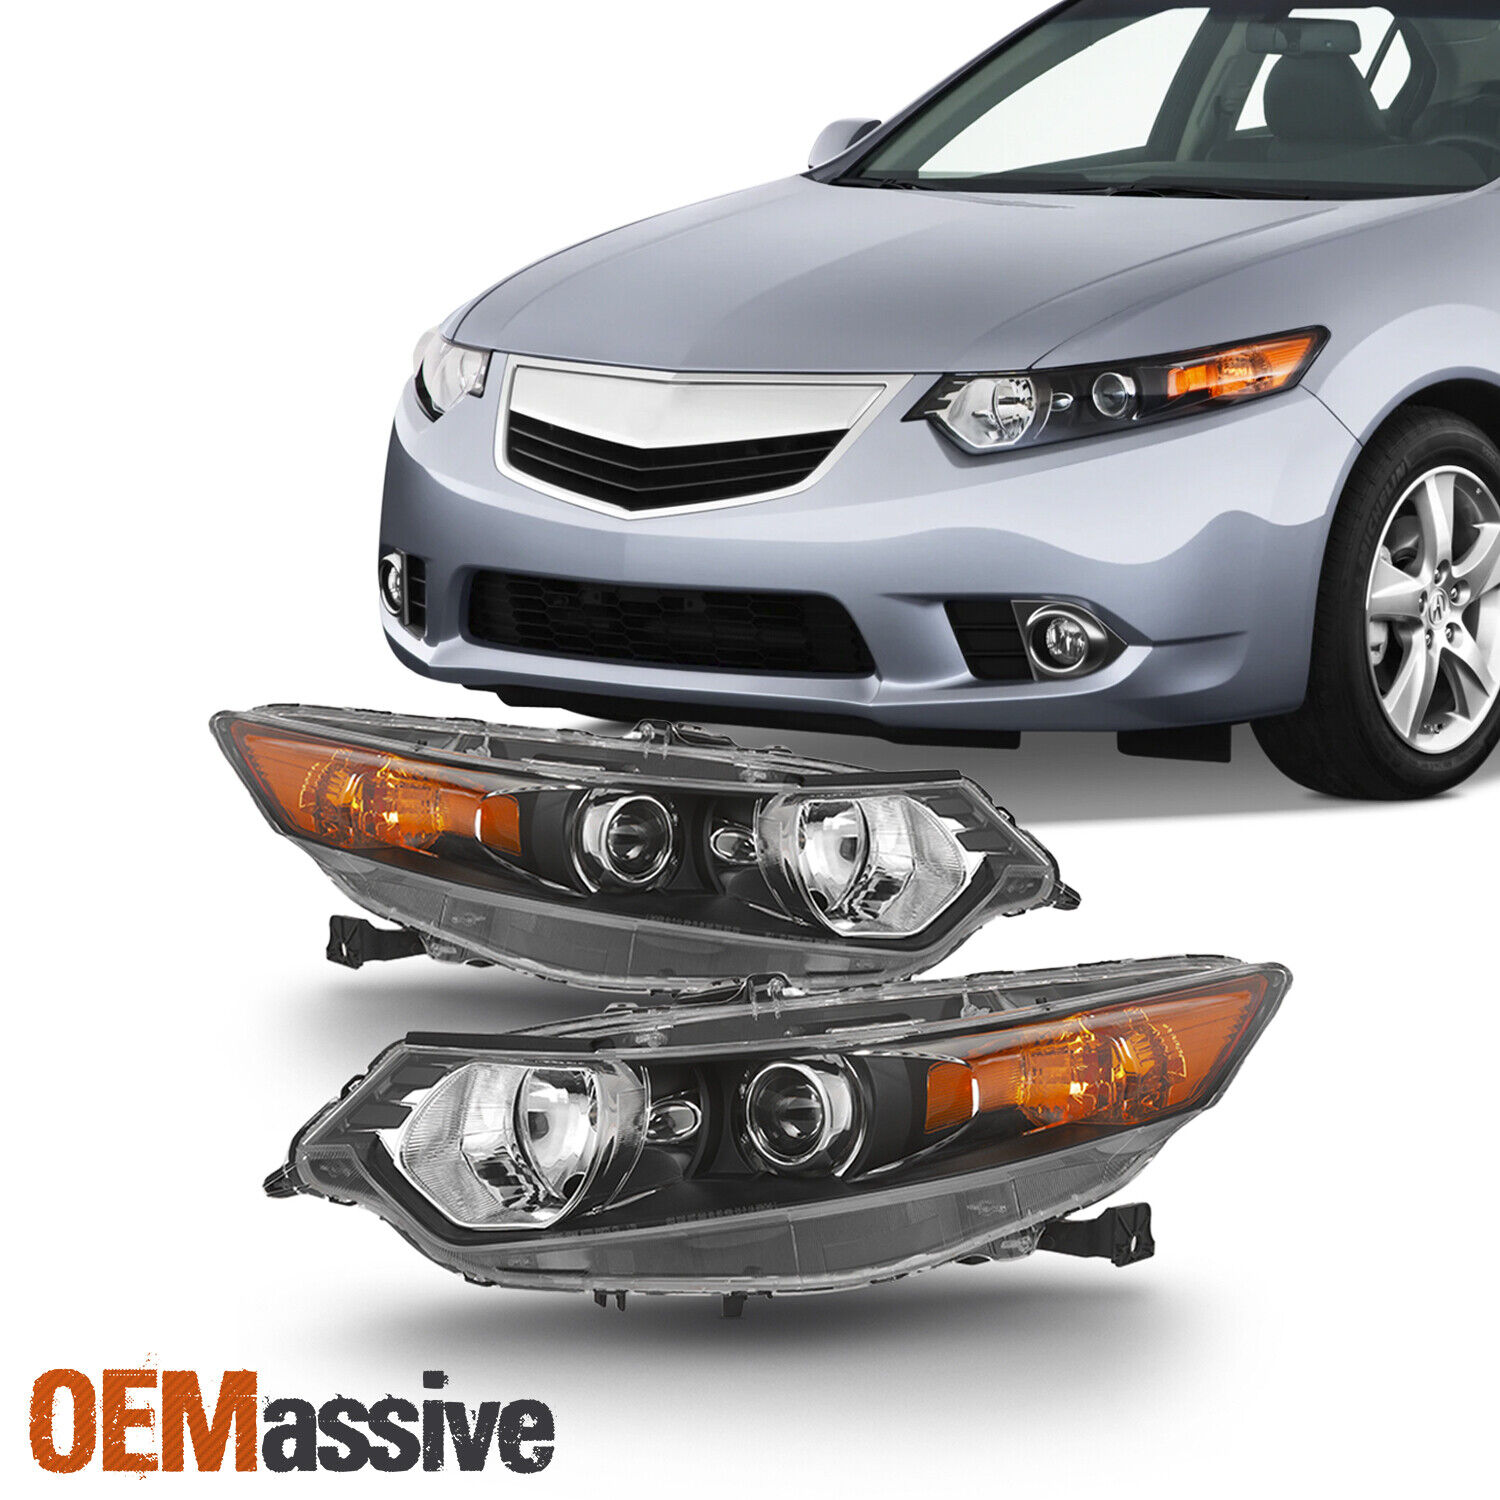 For Acura TSX 2009 2010 2011 2012 2013 2014 HID Type Headlights Left+Right Side